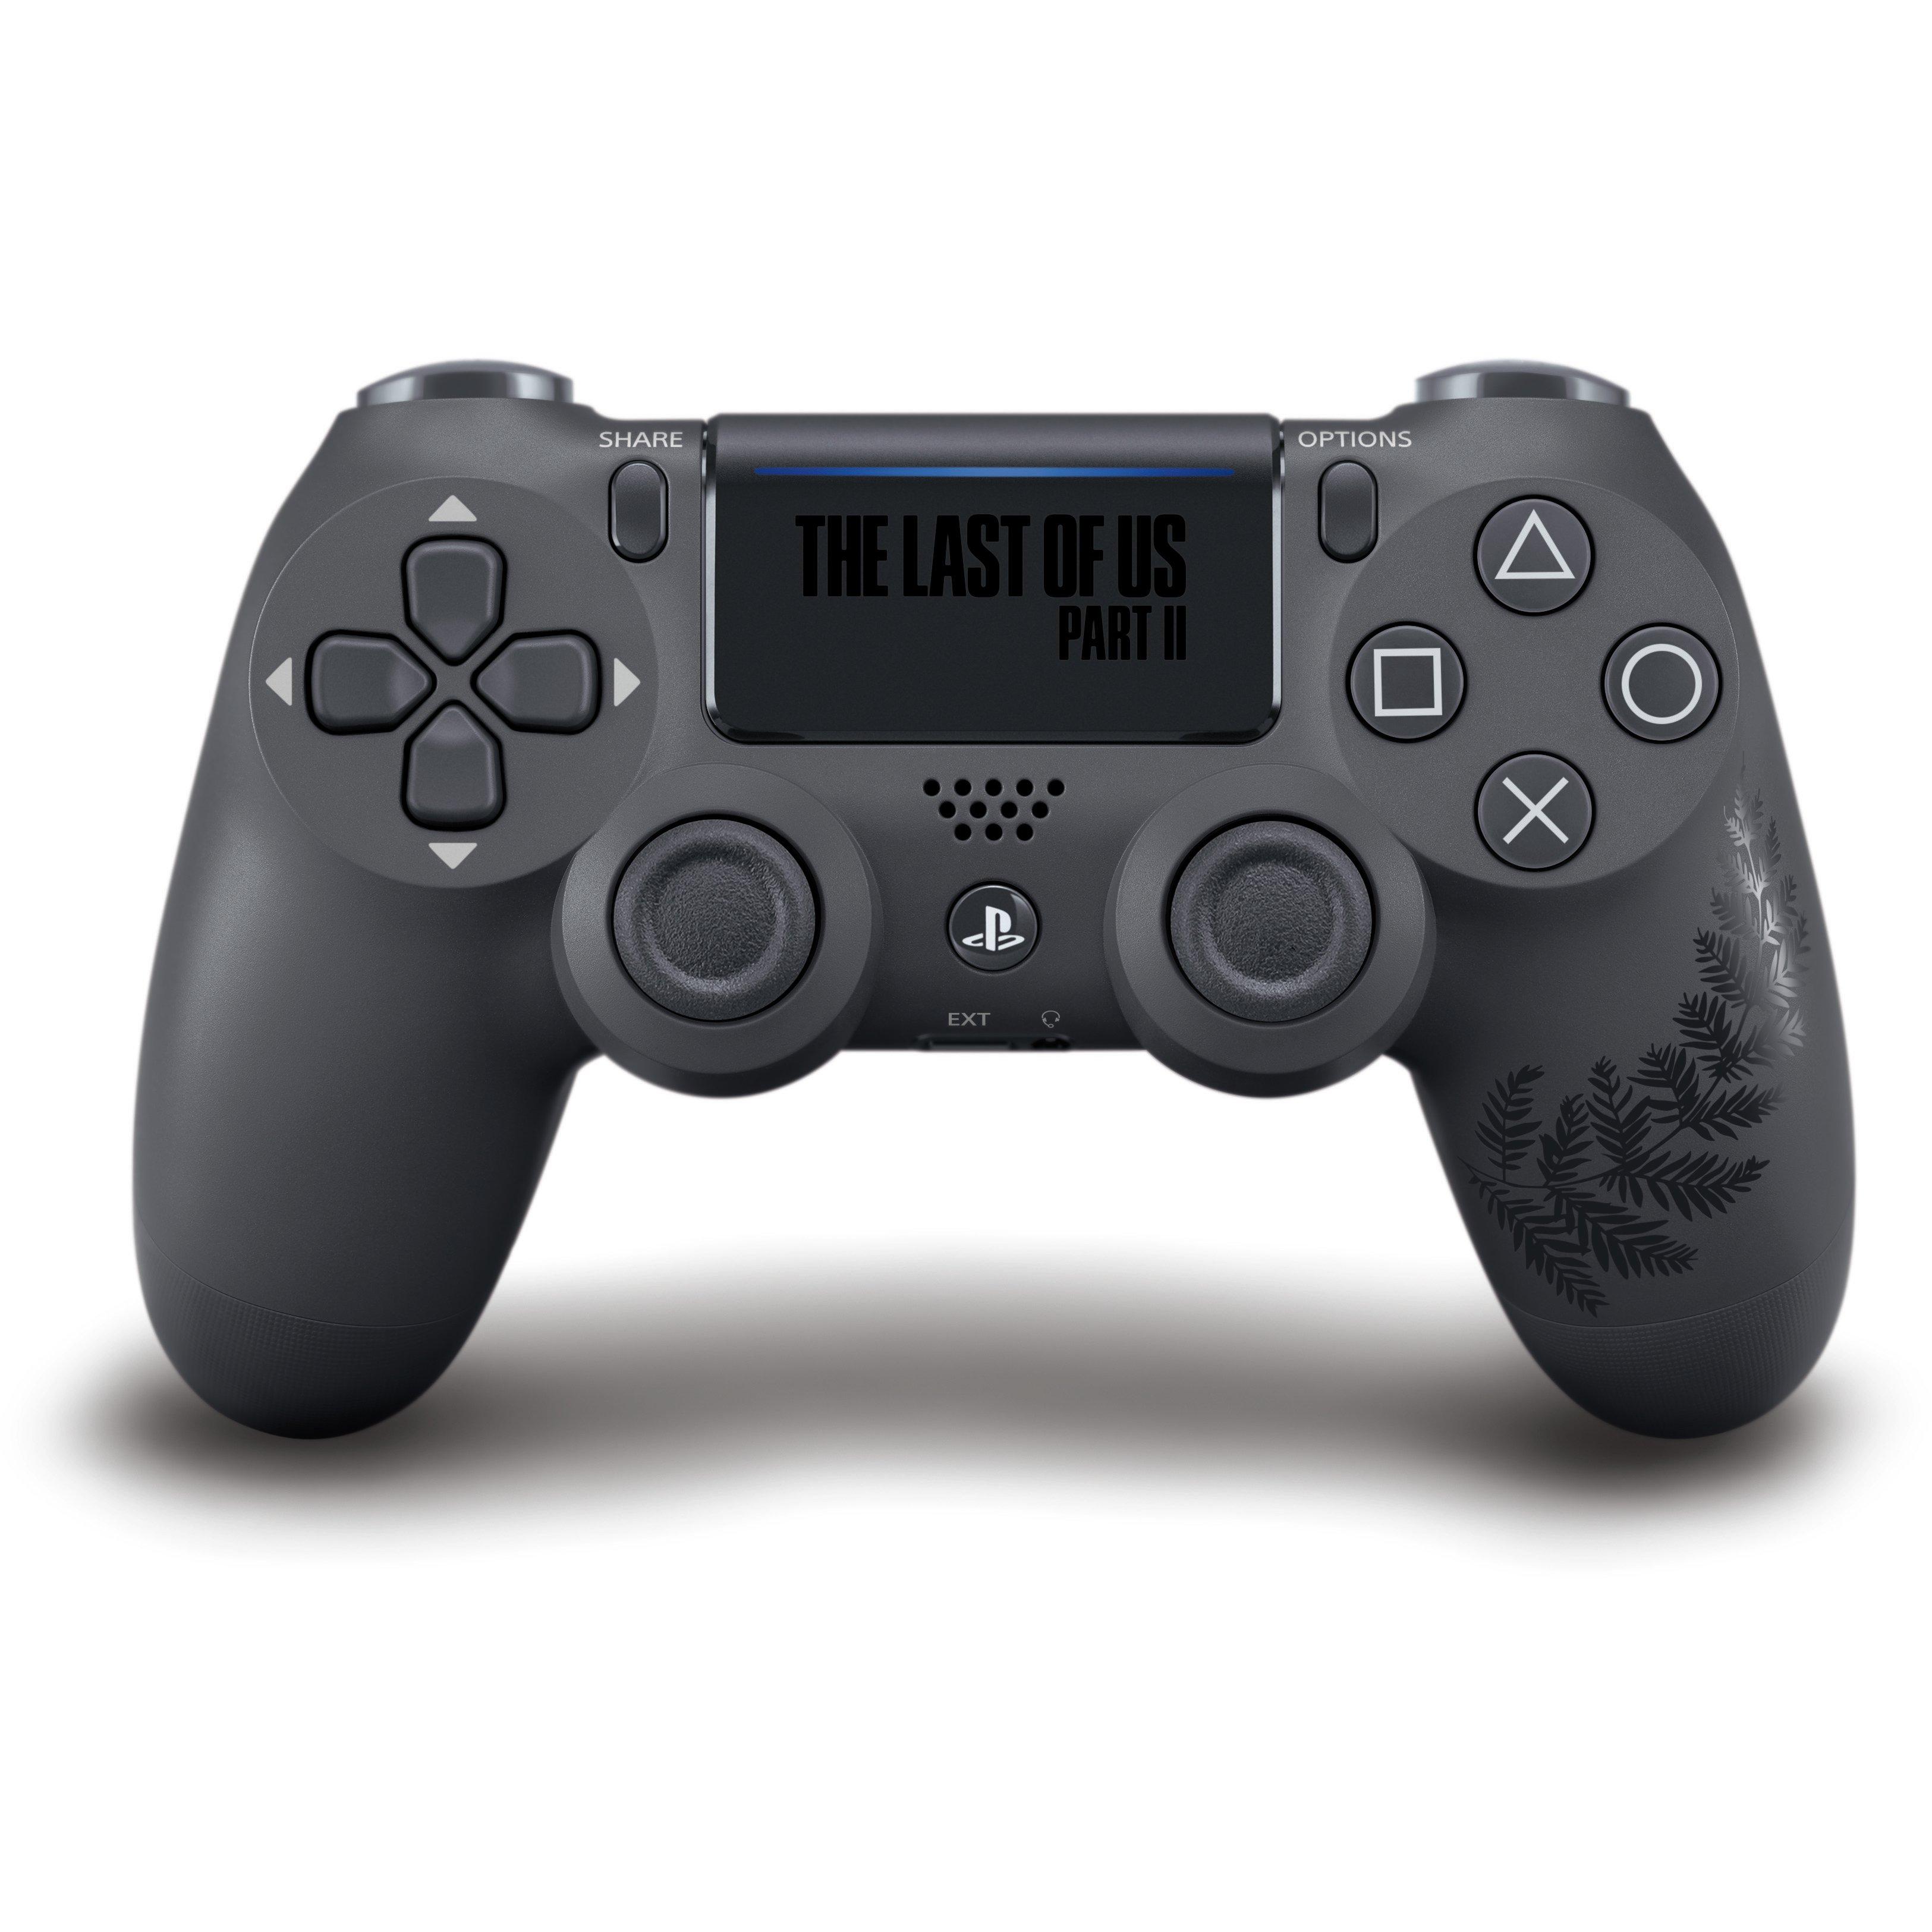 Sony 4 Last of Us Part II Limited Edition Wireless Controller | GameStop